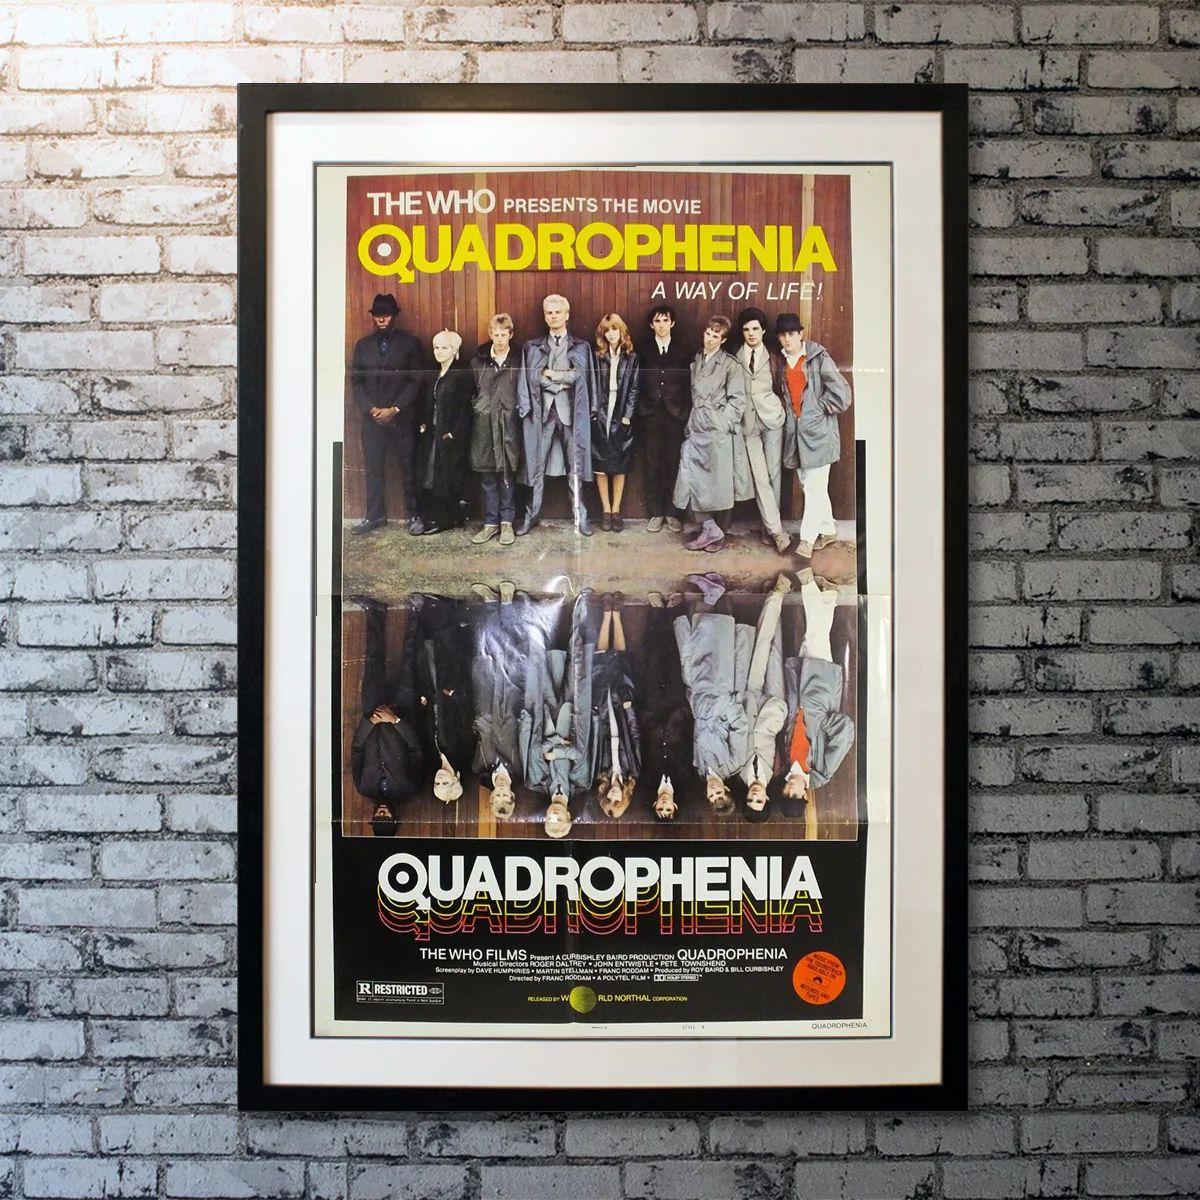 Quadrophenia, Unframed Poster, 1979

Original One Sheet (27 X 41 Inches). Jimmy Cooper loathes his job and his parents. He seeks solace with his mod clique, scooter riding, and drugs, only to be disappointed.

Additional Information:
Year: